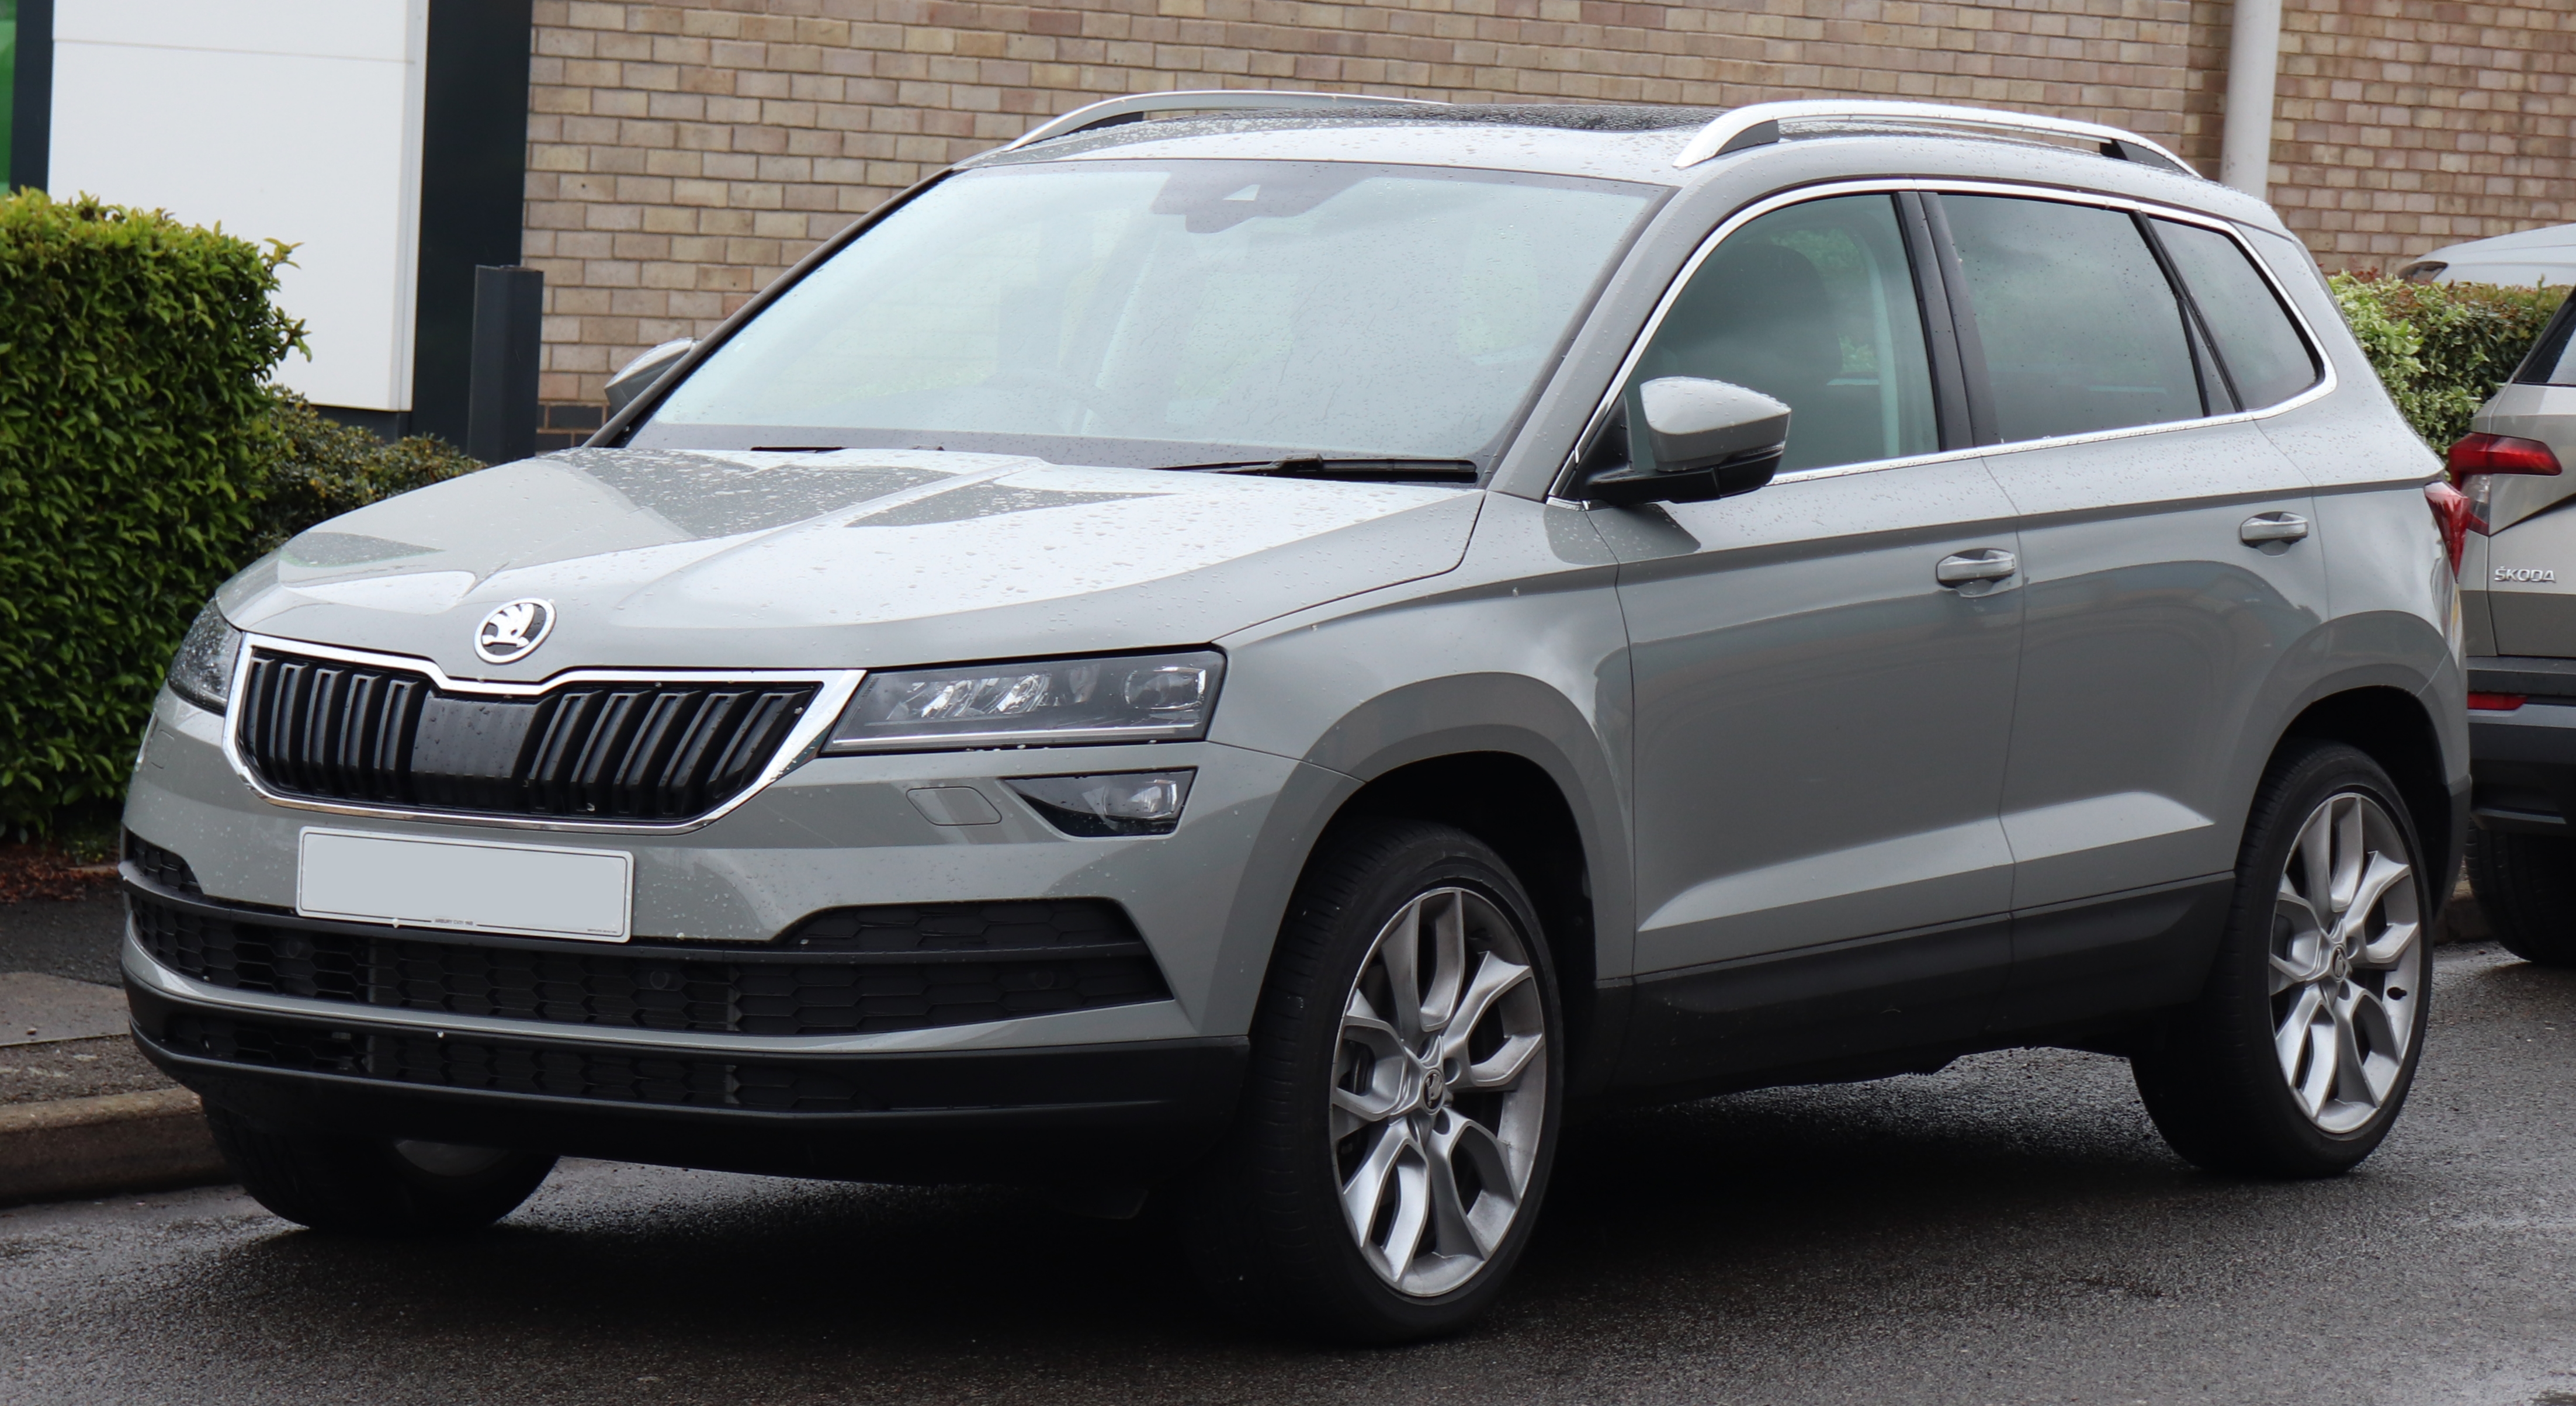 Skoda Auto and Kushaq together target 10% of the mid size SUV market